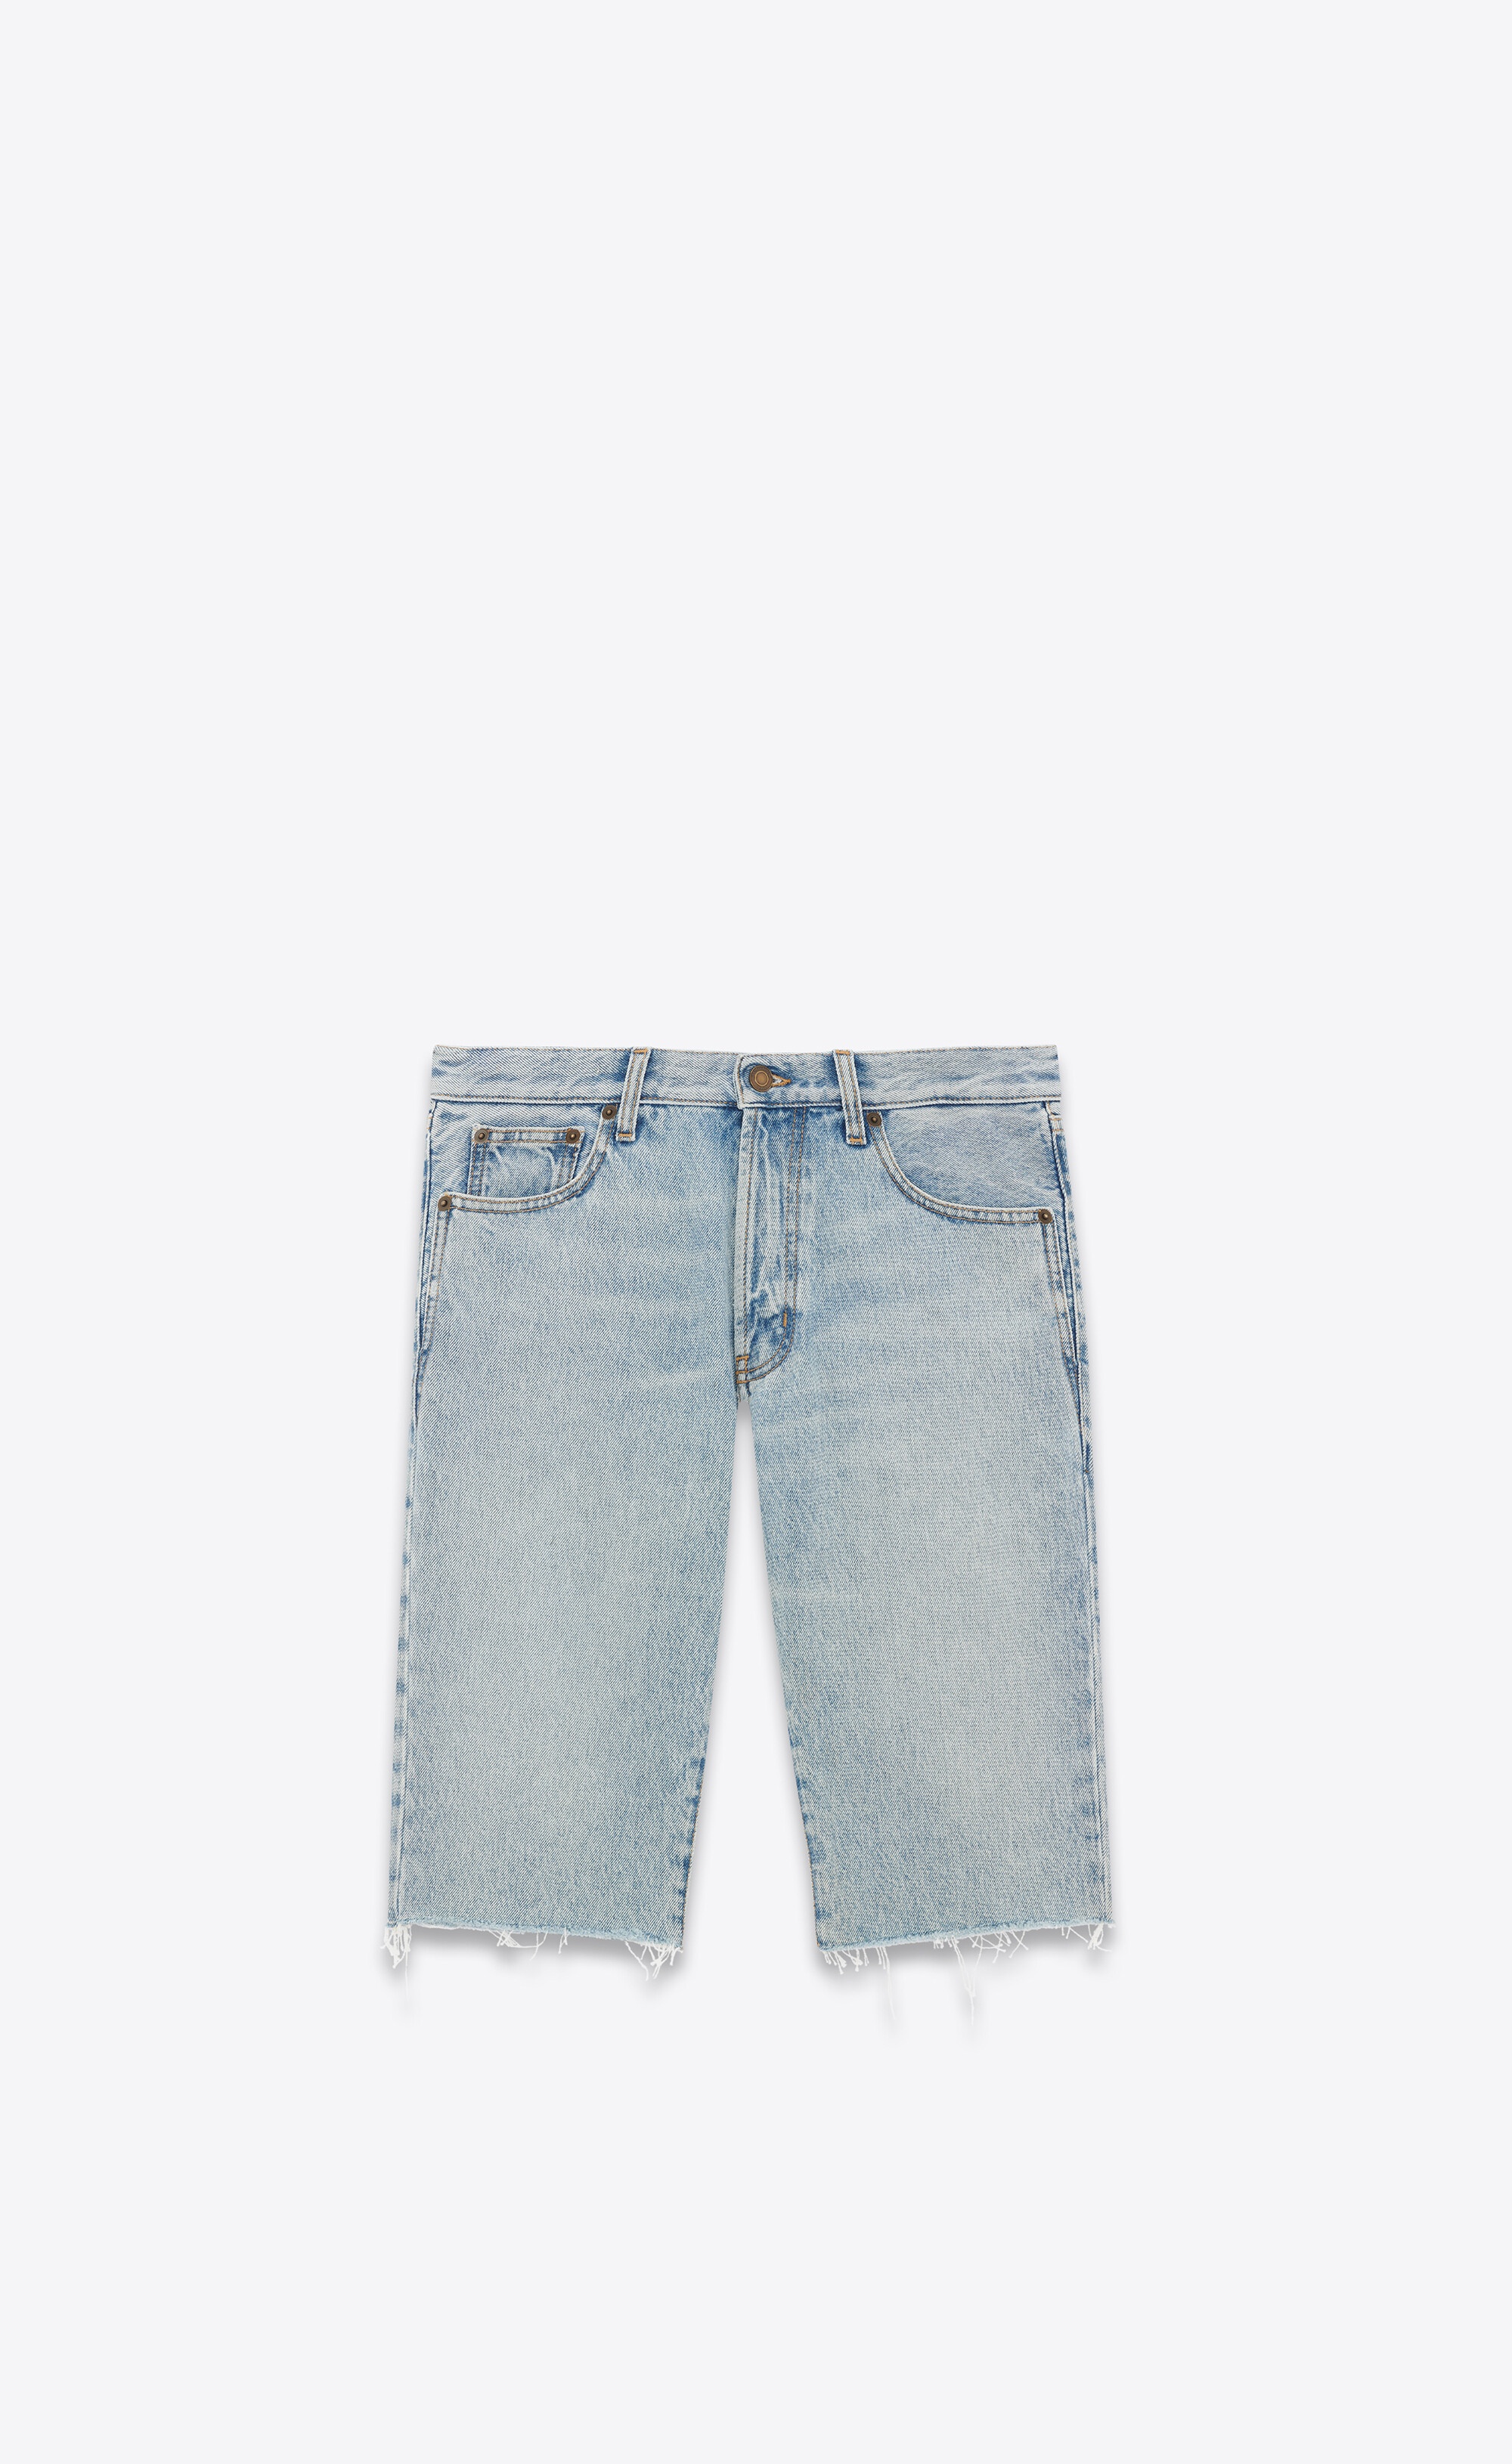 relaxed-fit shorts in tuscon blue denim - 1